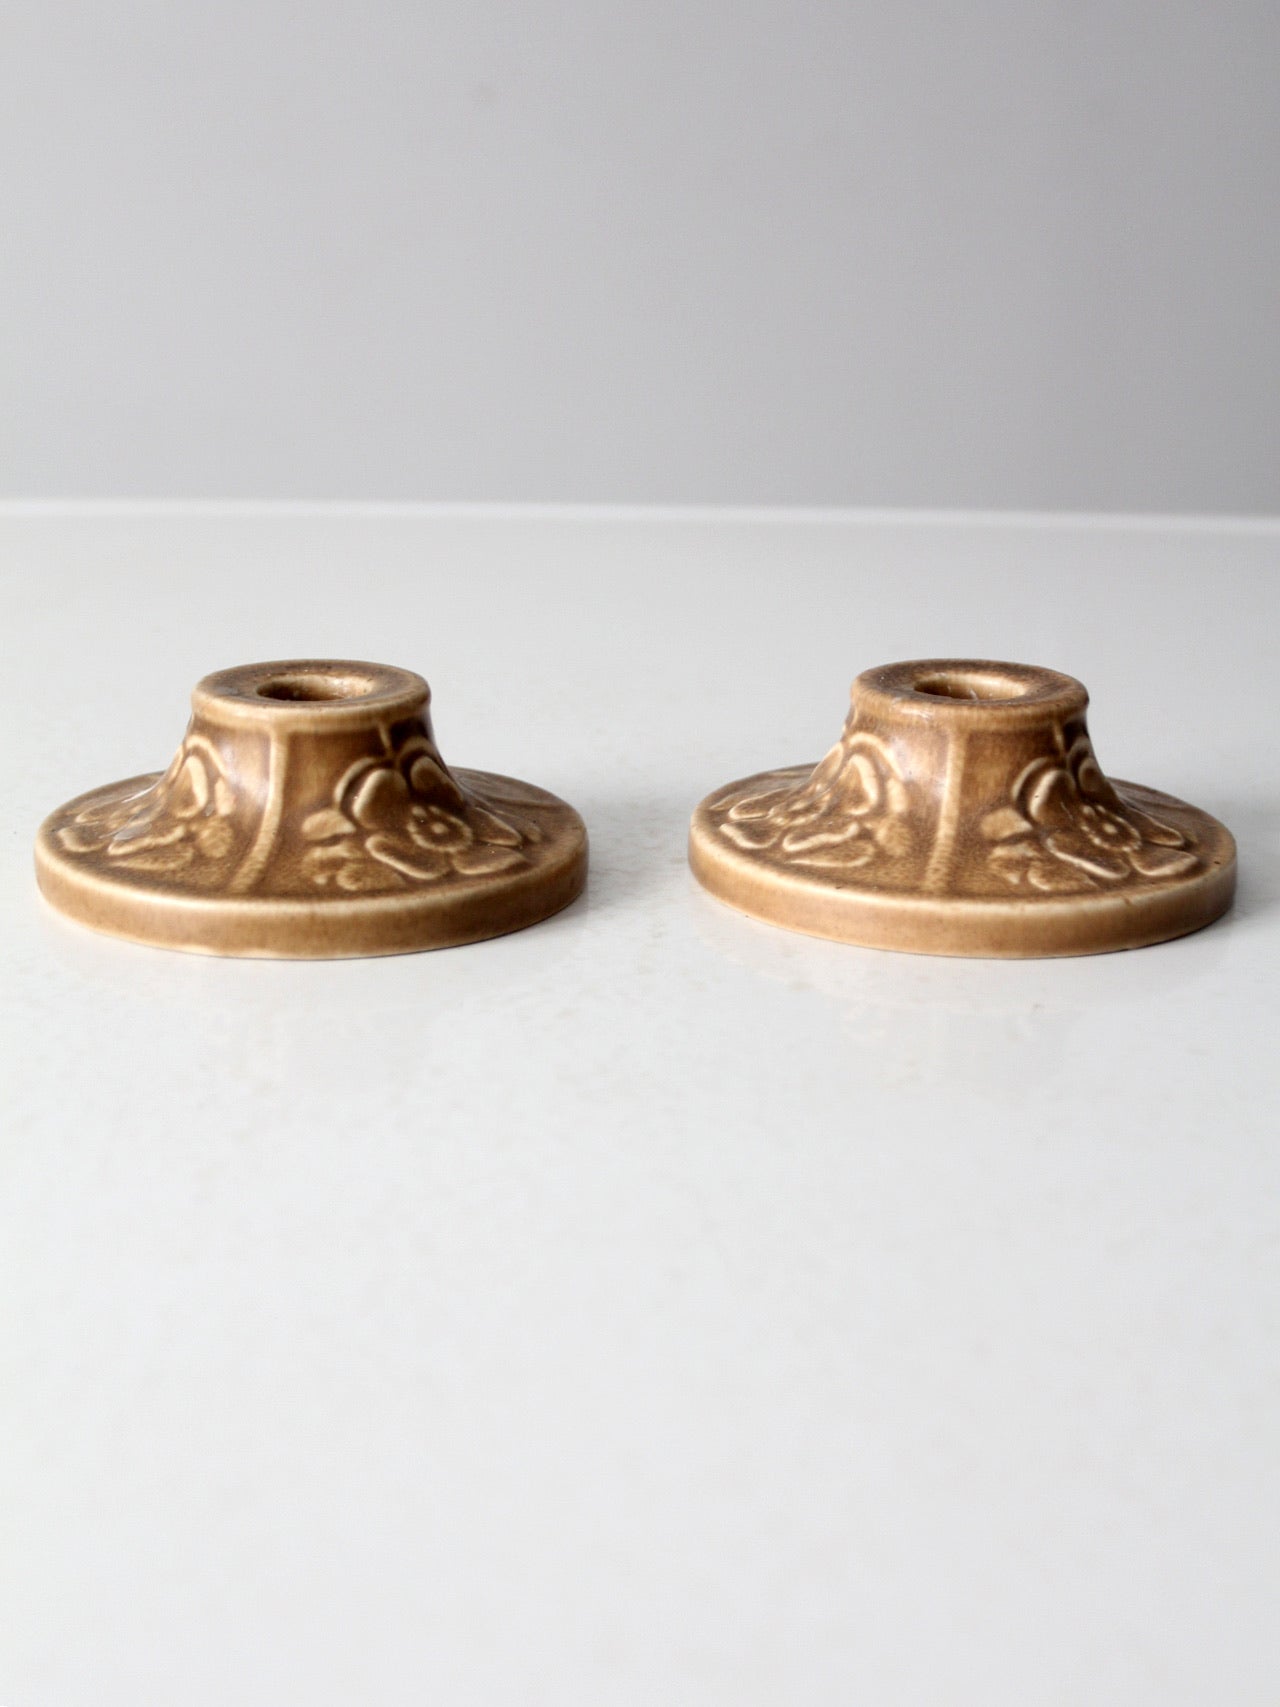 antique Rookwood Pottery candlestick holders pair